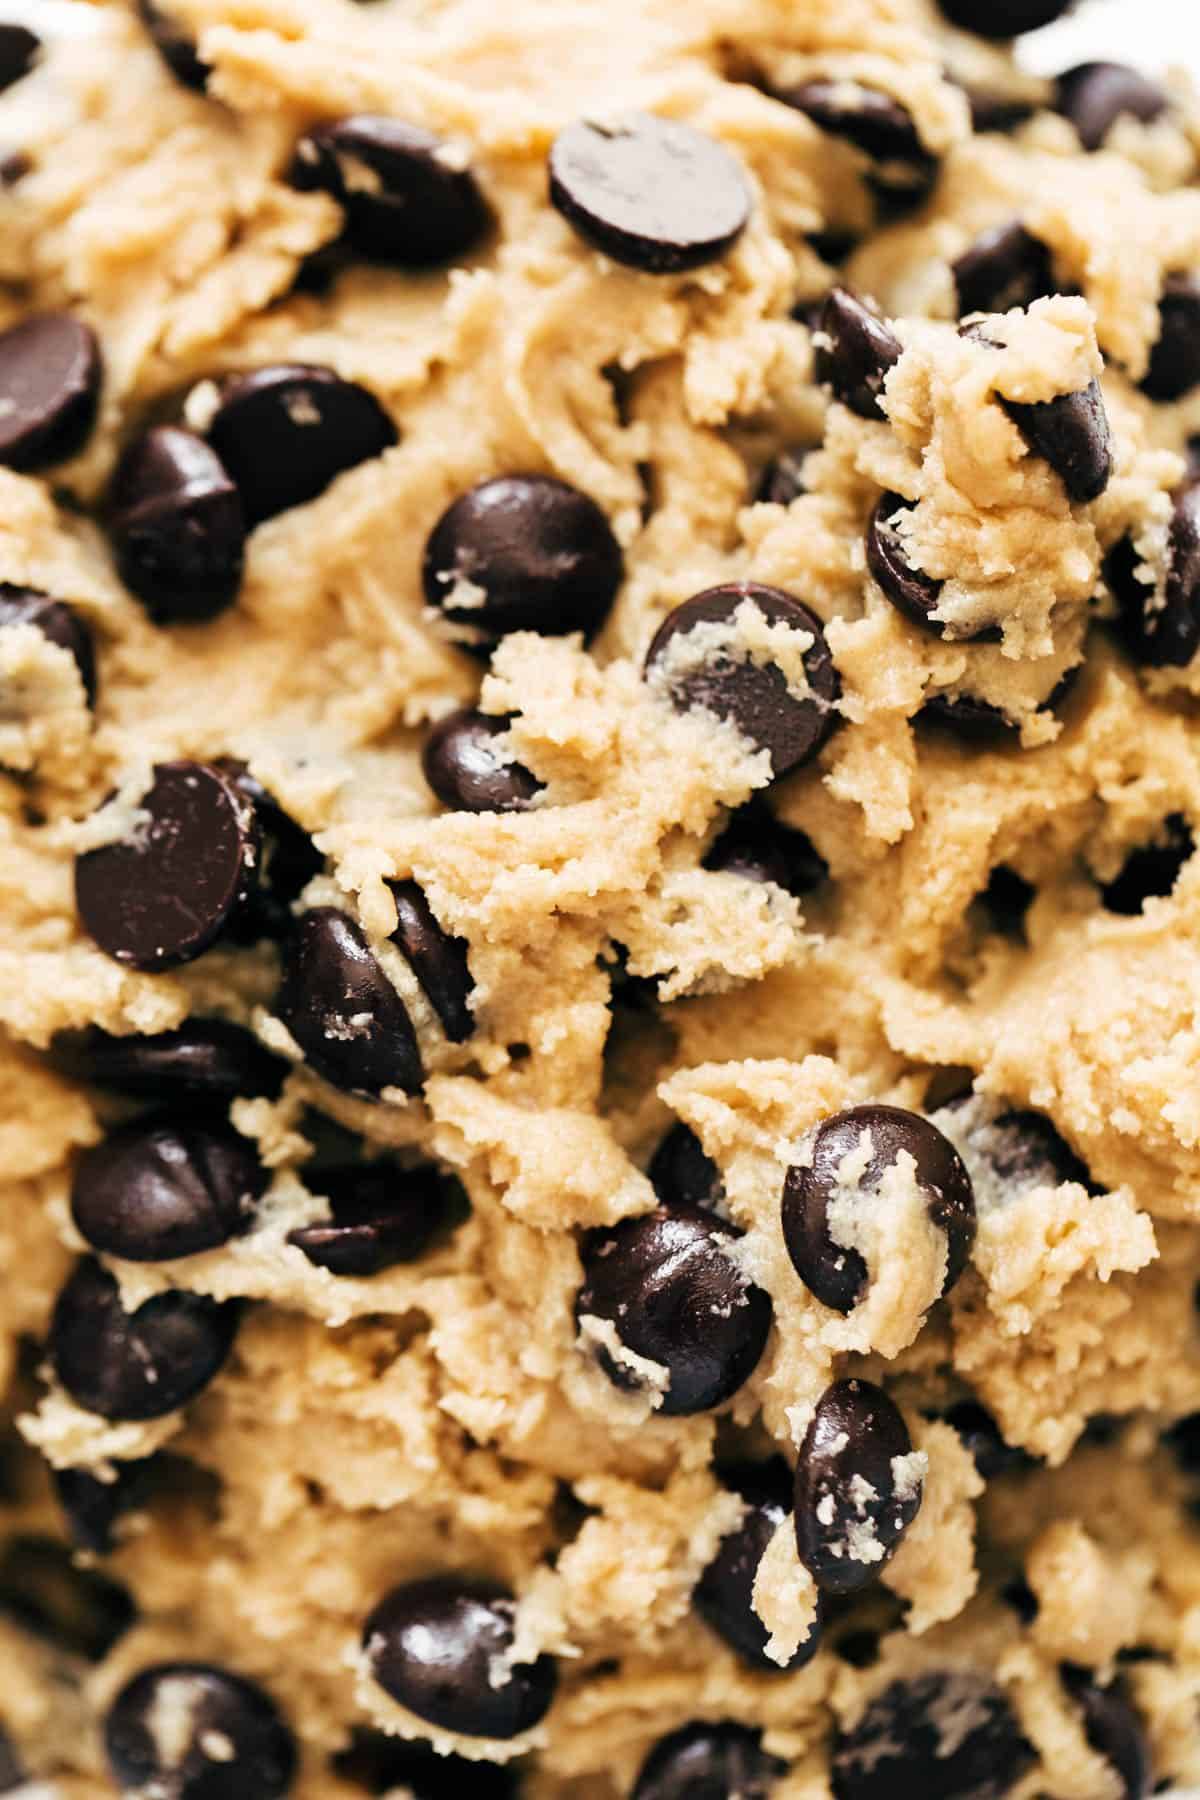 Mixed cookie batter with chocolate chip cookies